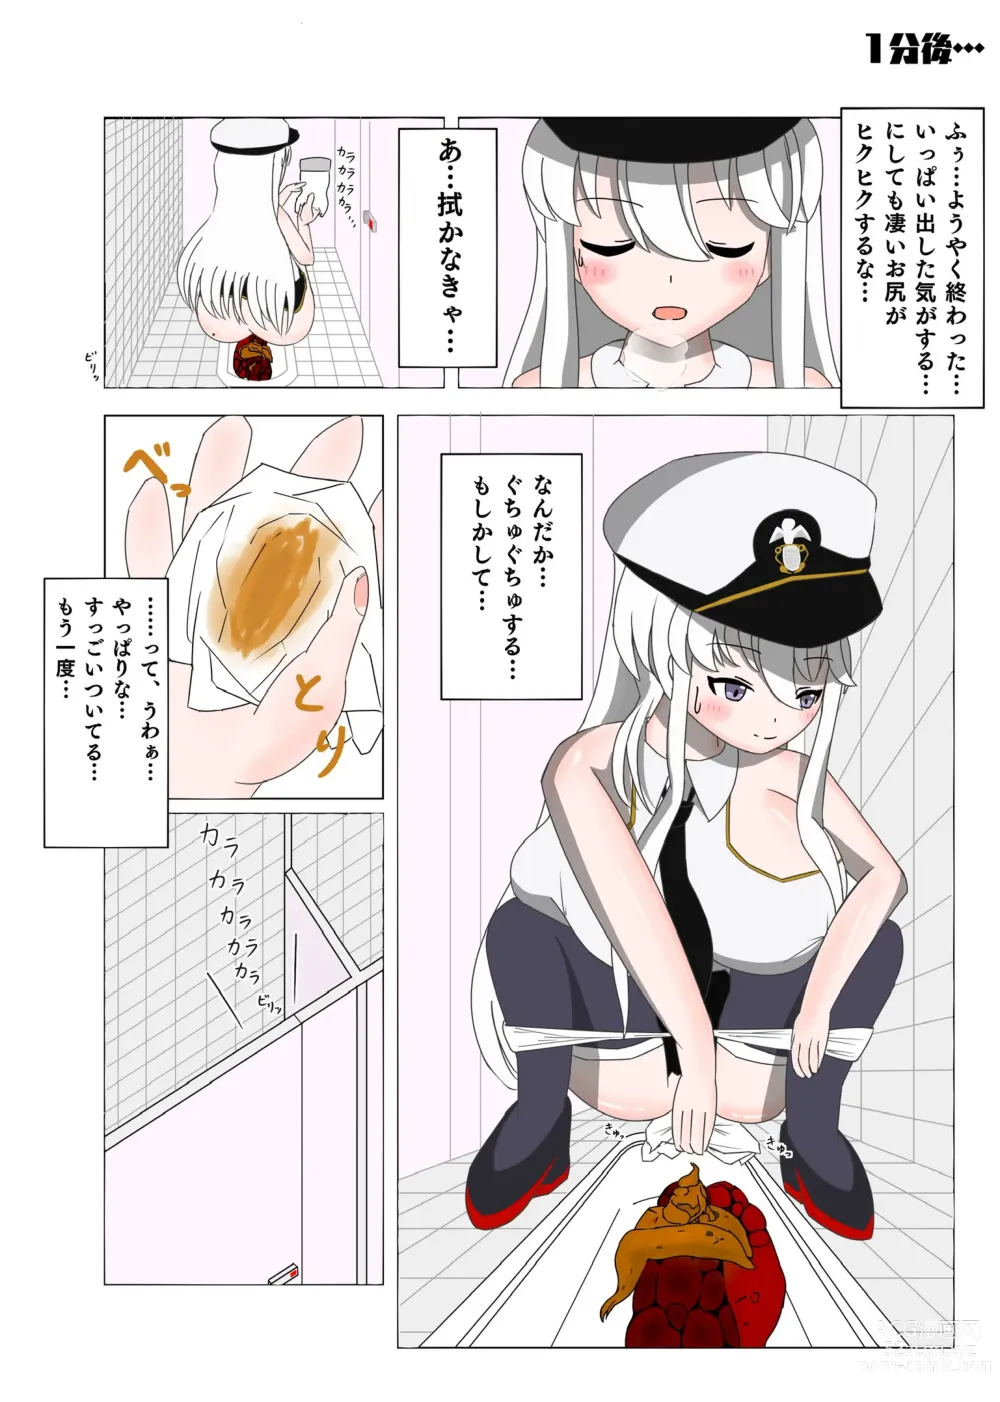 Page 13 of doujinshi A manga in which Enterprise relieves 3 days worth of poop in a Japanese-style toilet